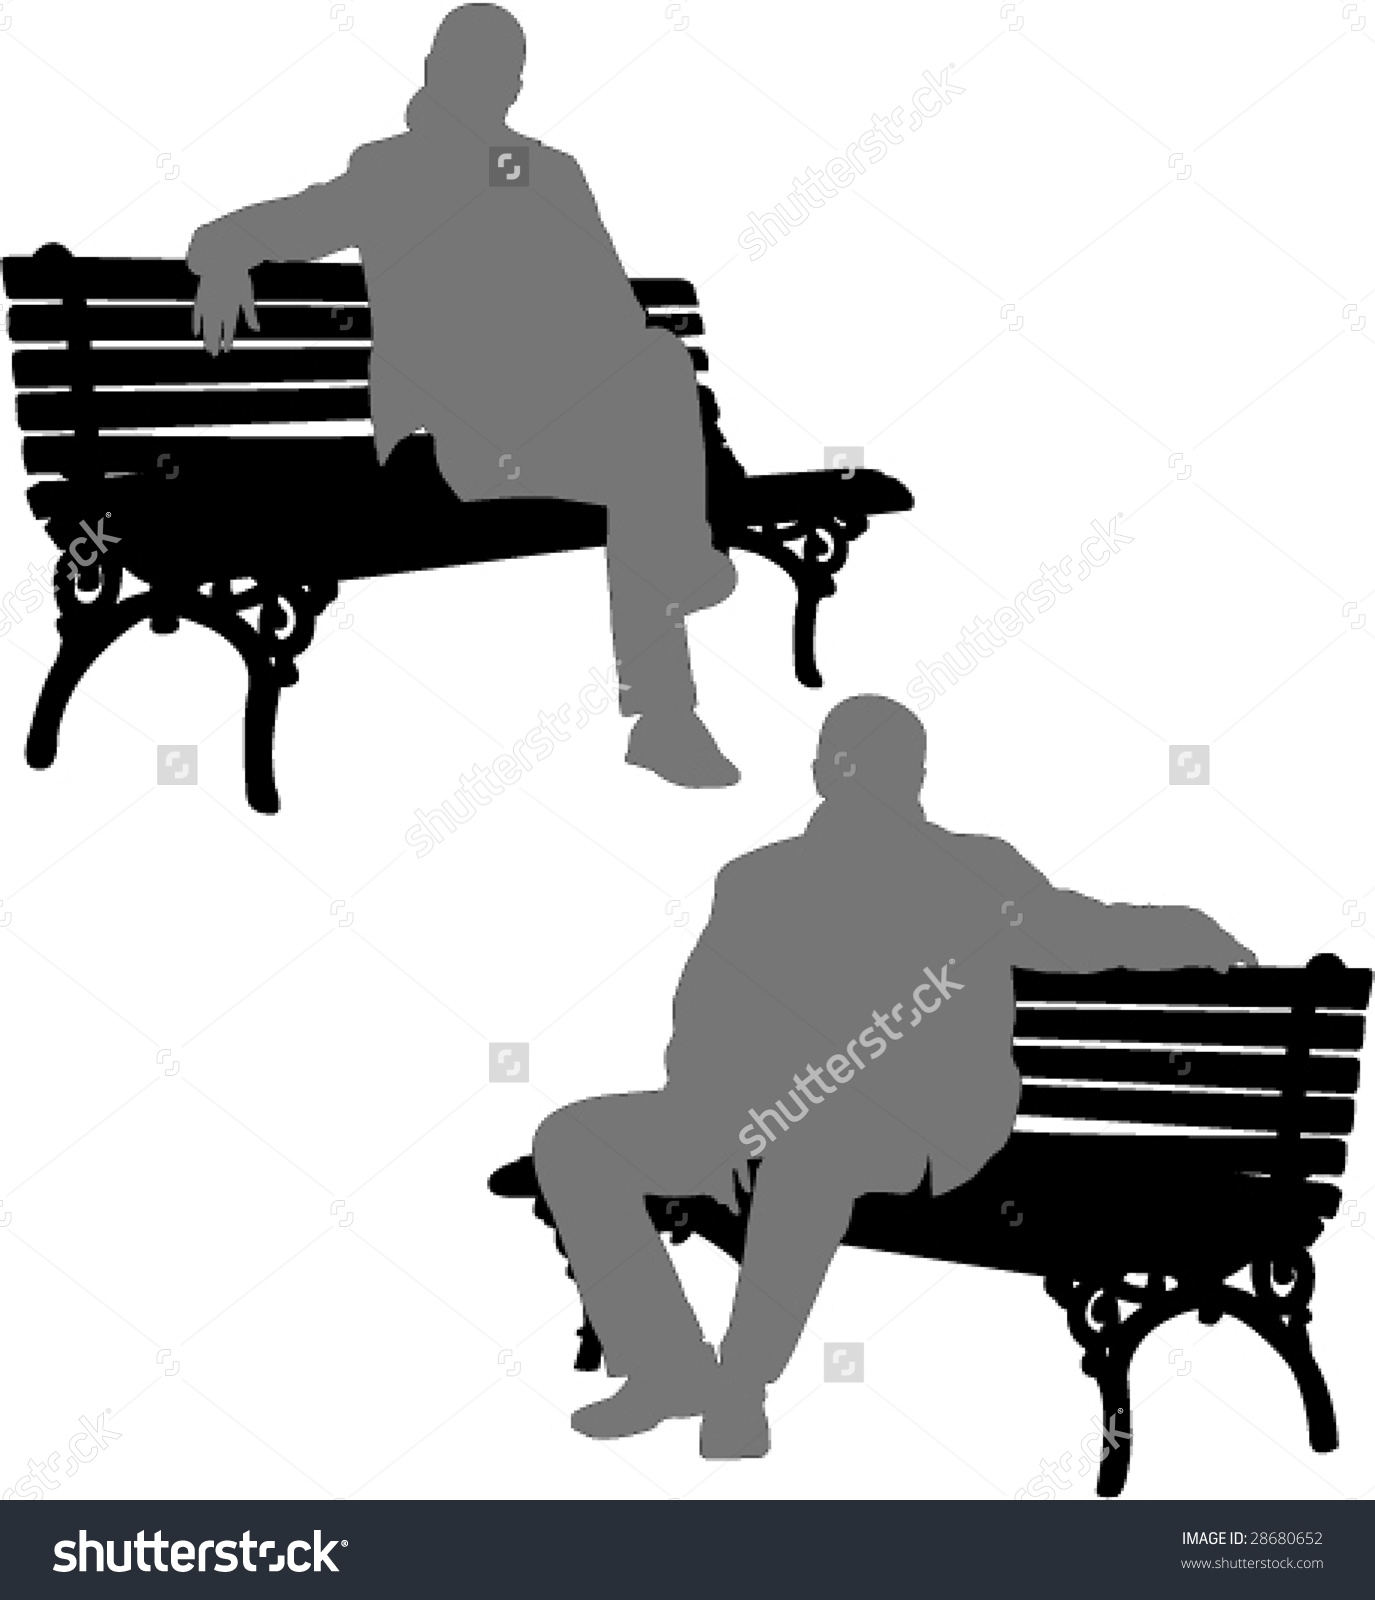 Silhouette Free Clipart Of 2 Men Setting On A Bench.